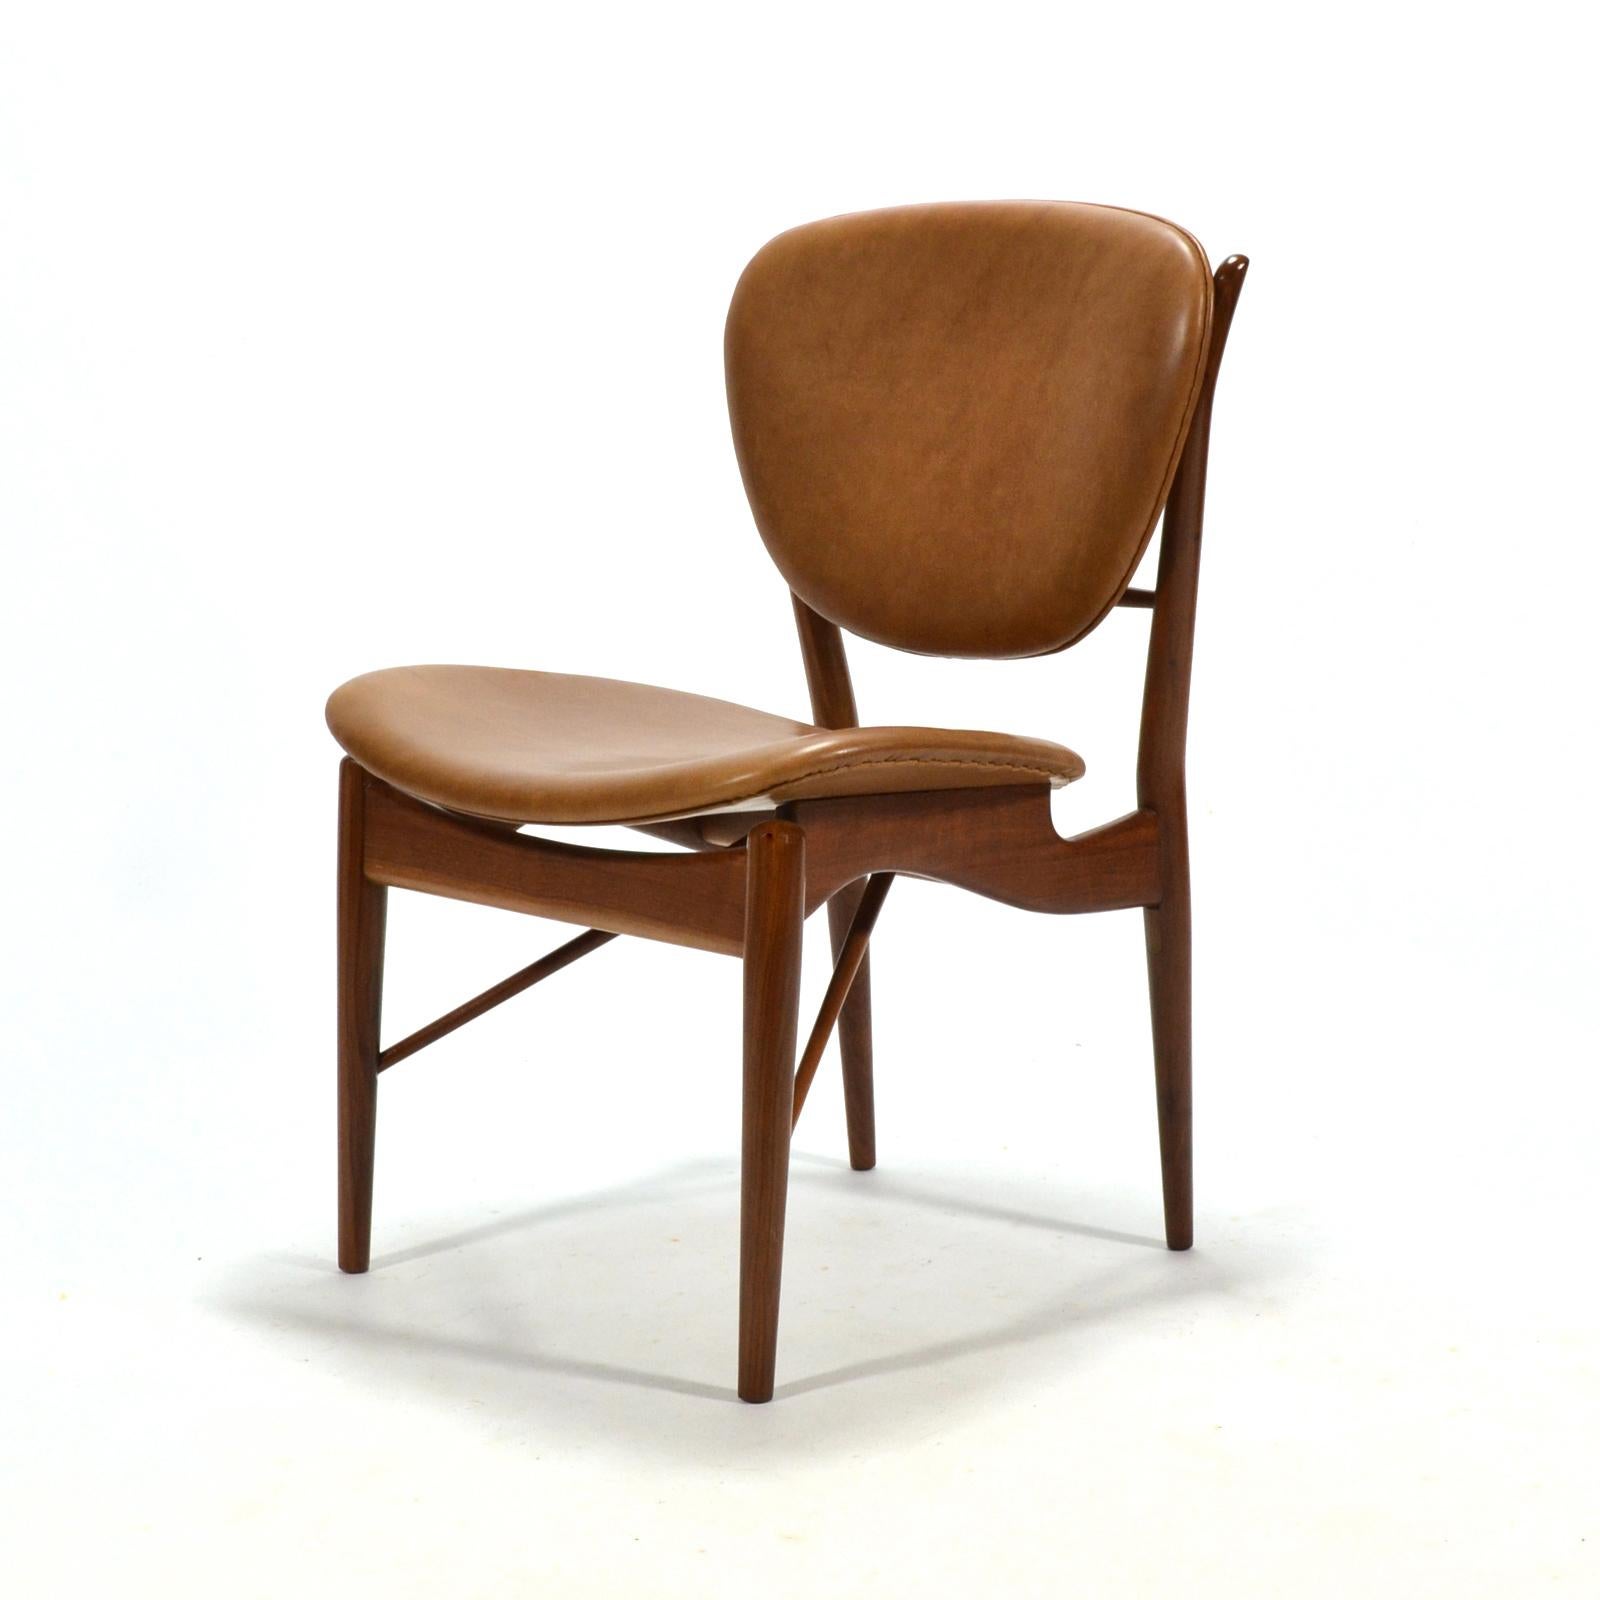 Finn Juhl's elegant, sculptural, and remarkably comfortable side chair by Baker is perfect for use at a dining table, writing table, desk or vanity.